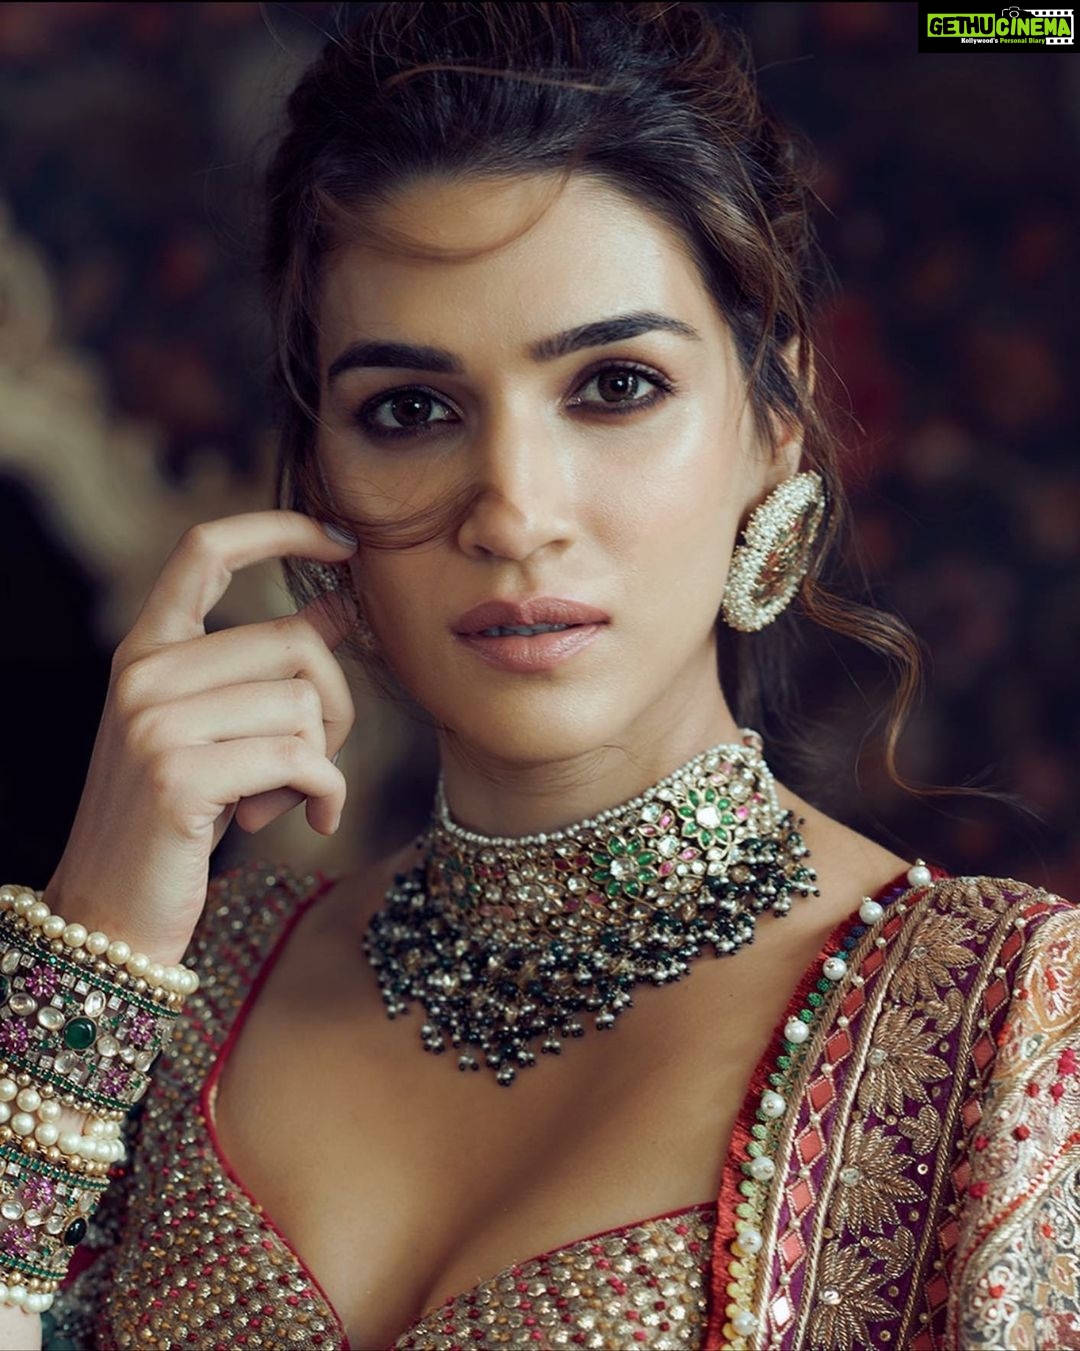 Kriti Sanon Sex Sex Sex Sex - Kriti Sanon Instagram - For once in life, Unleash your heart And let it  take the lead. Let it twirl you fearlessly And sweep you off your feet.  Listen, as it whispers